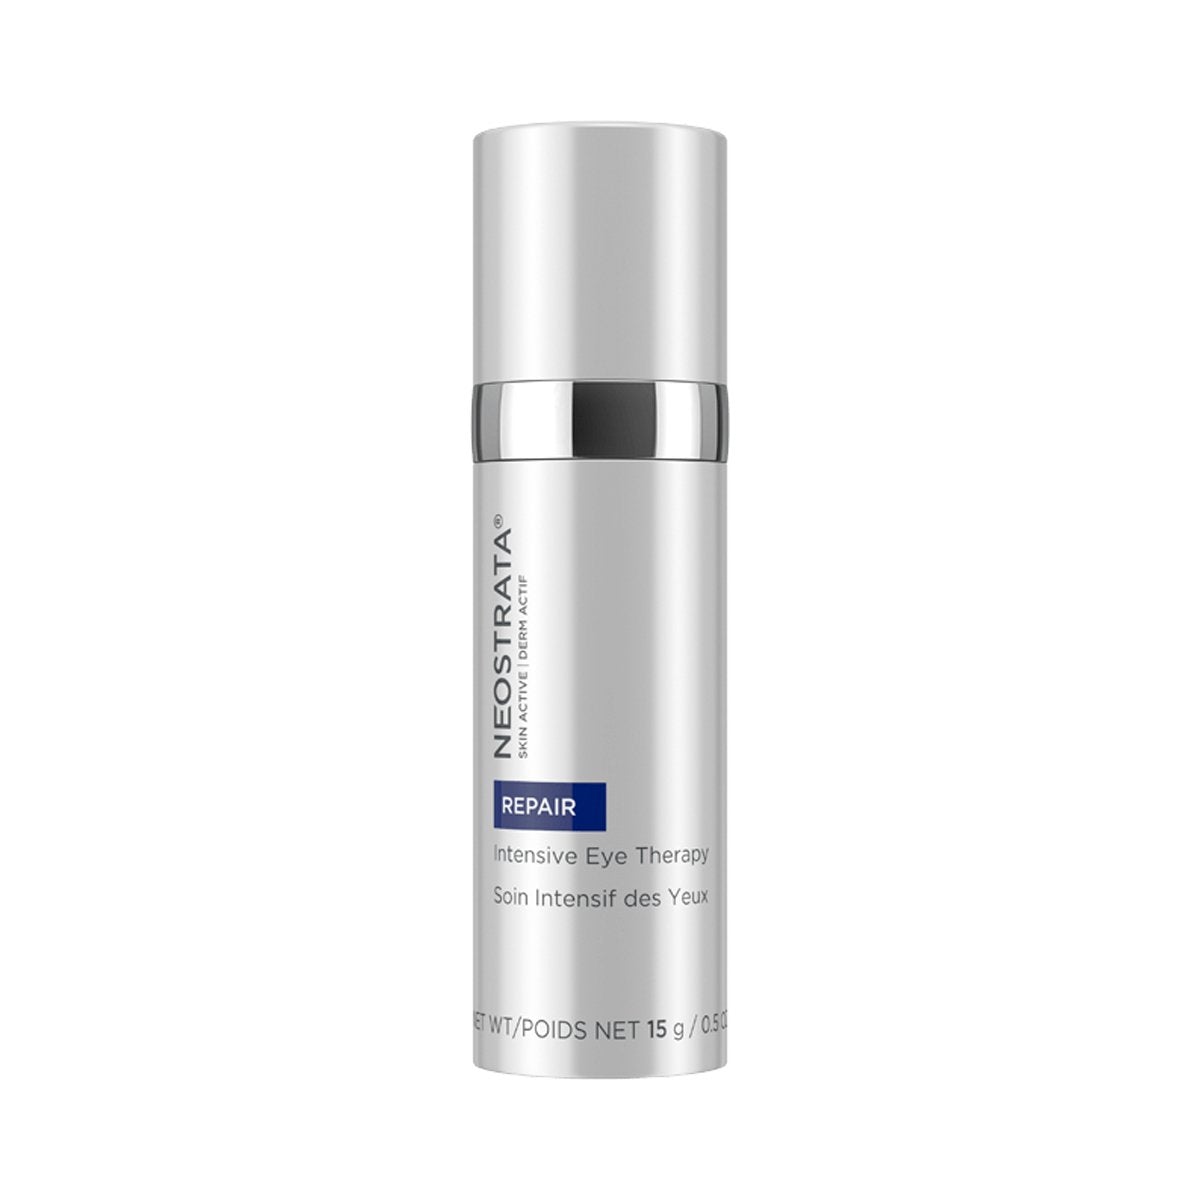 NEOSTRATA - Skin Active Intensive Eye Therapy - GWP